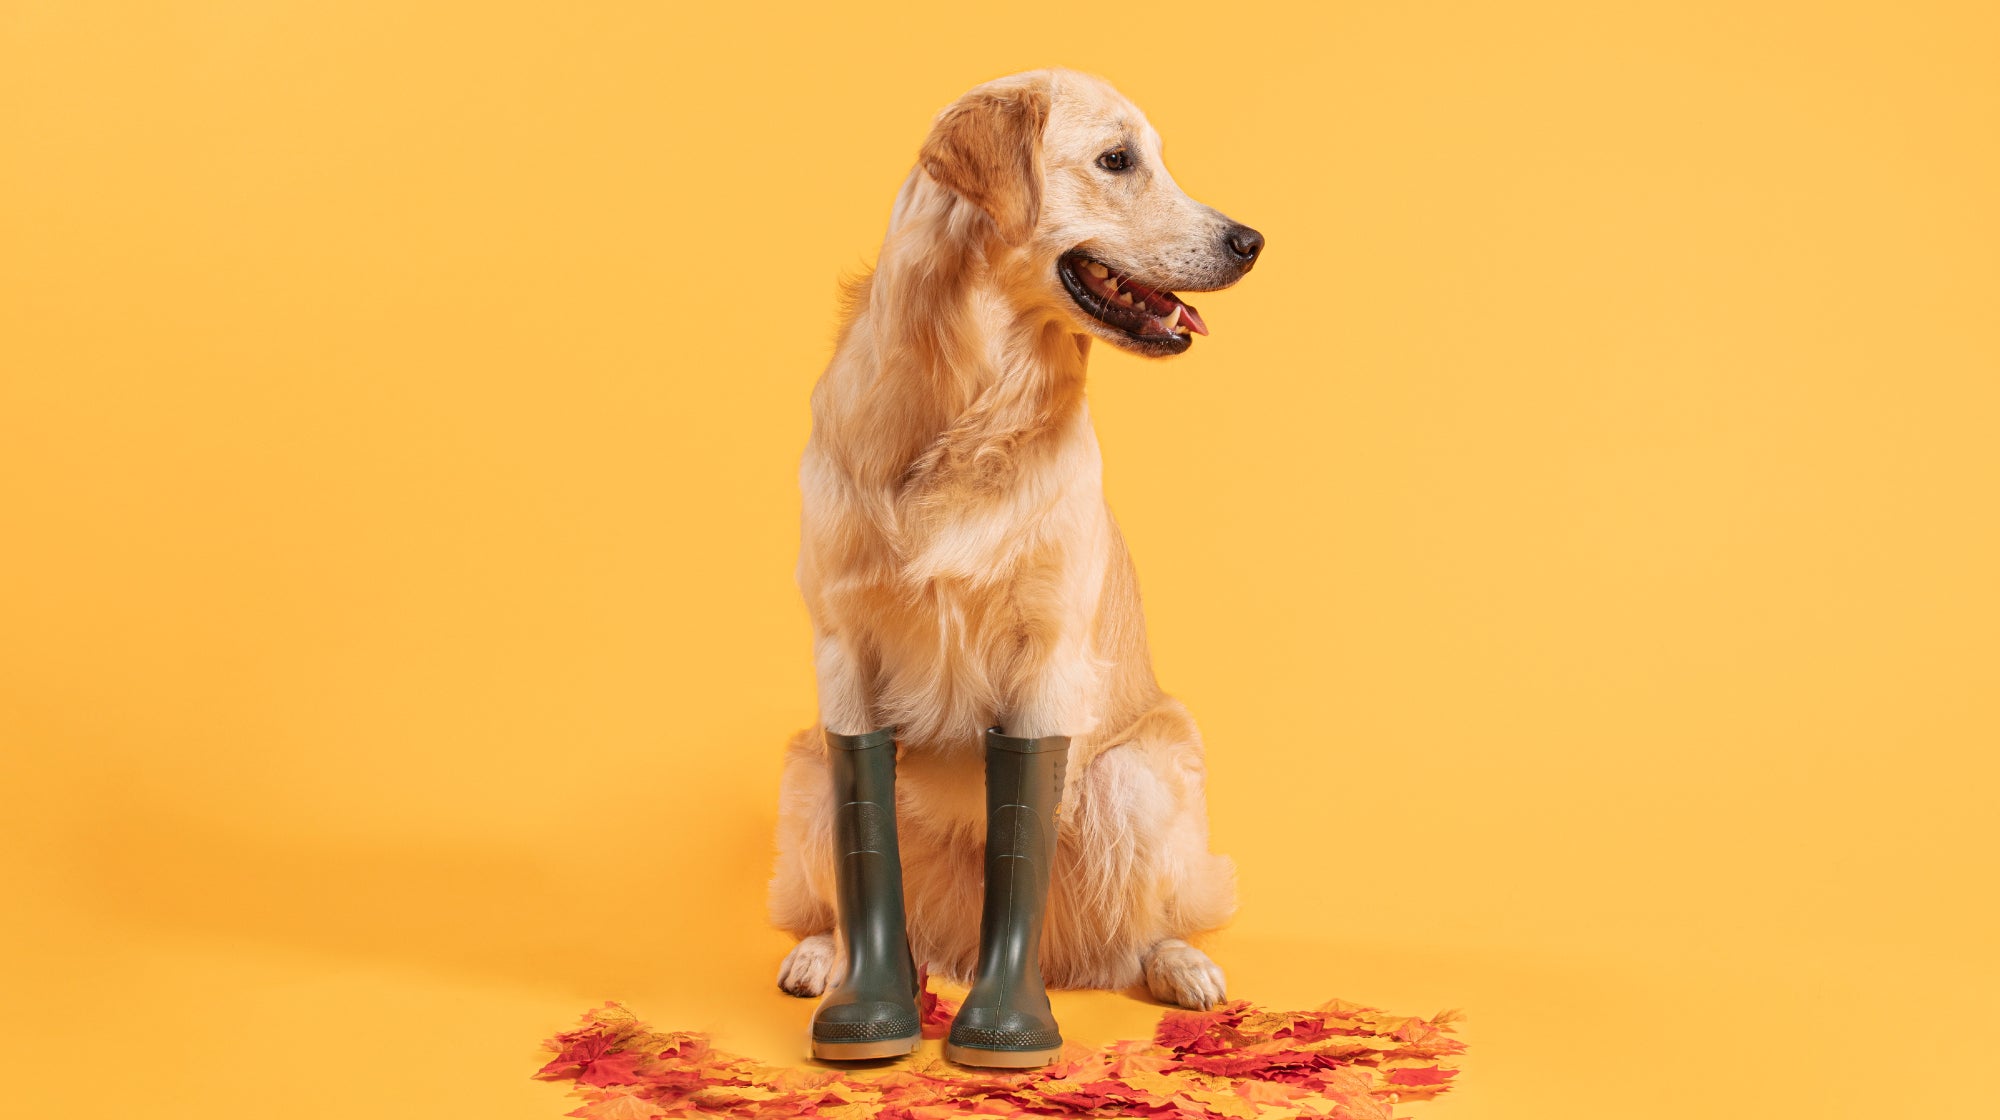 A golden retriever dog in a pair of olive green wellies, against a yellow backdrop